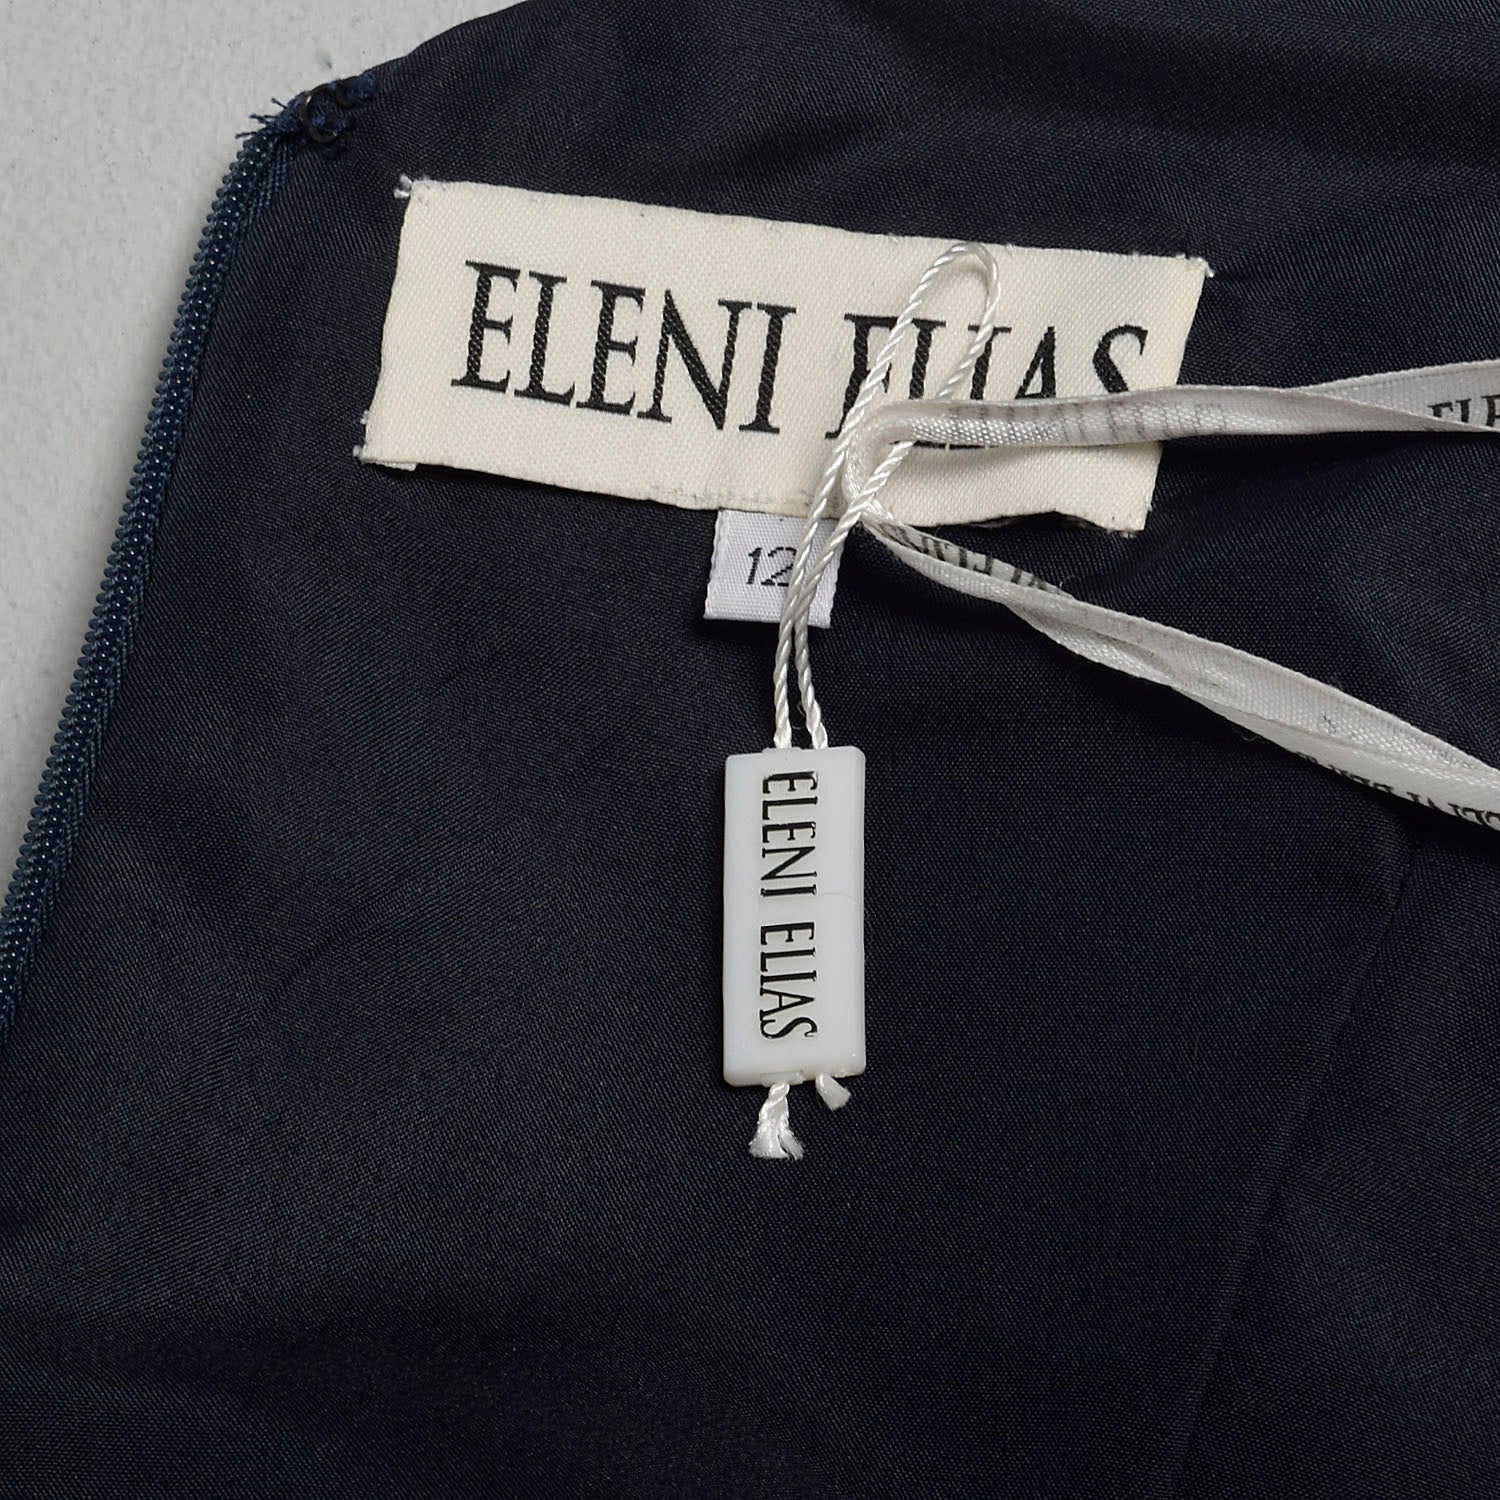 Size 12 2010s Eleni Elias Navy Evening Gown Formal Prom Fishtail Train